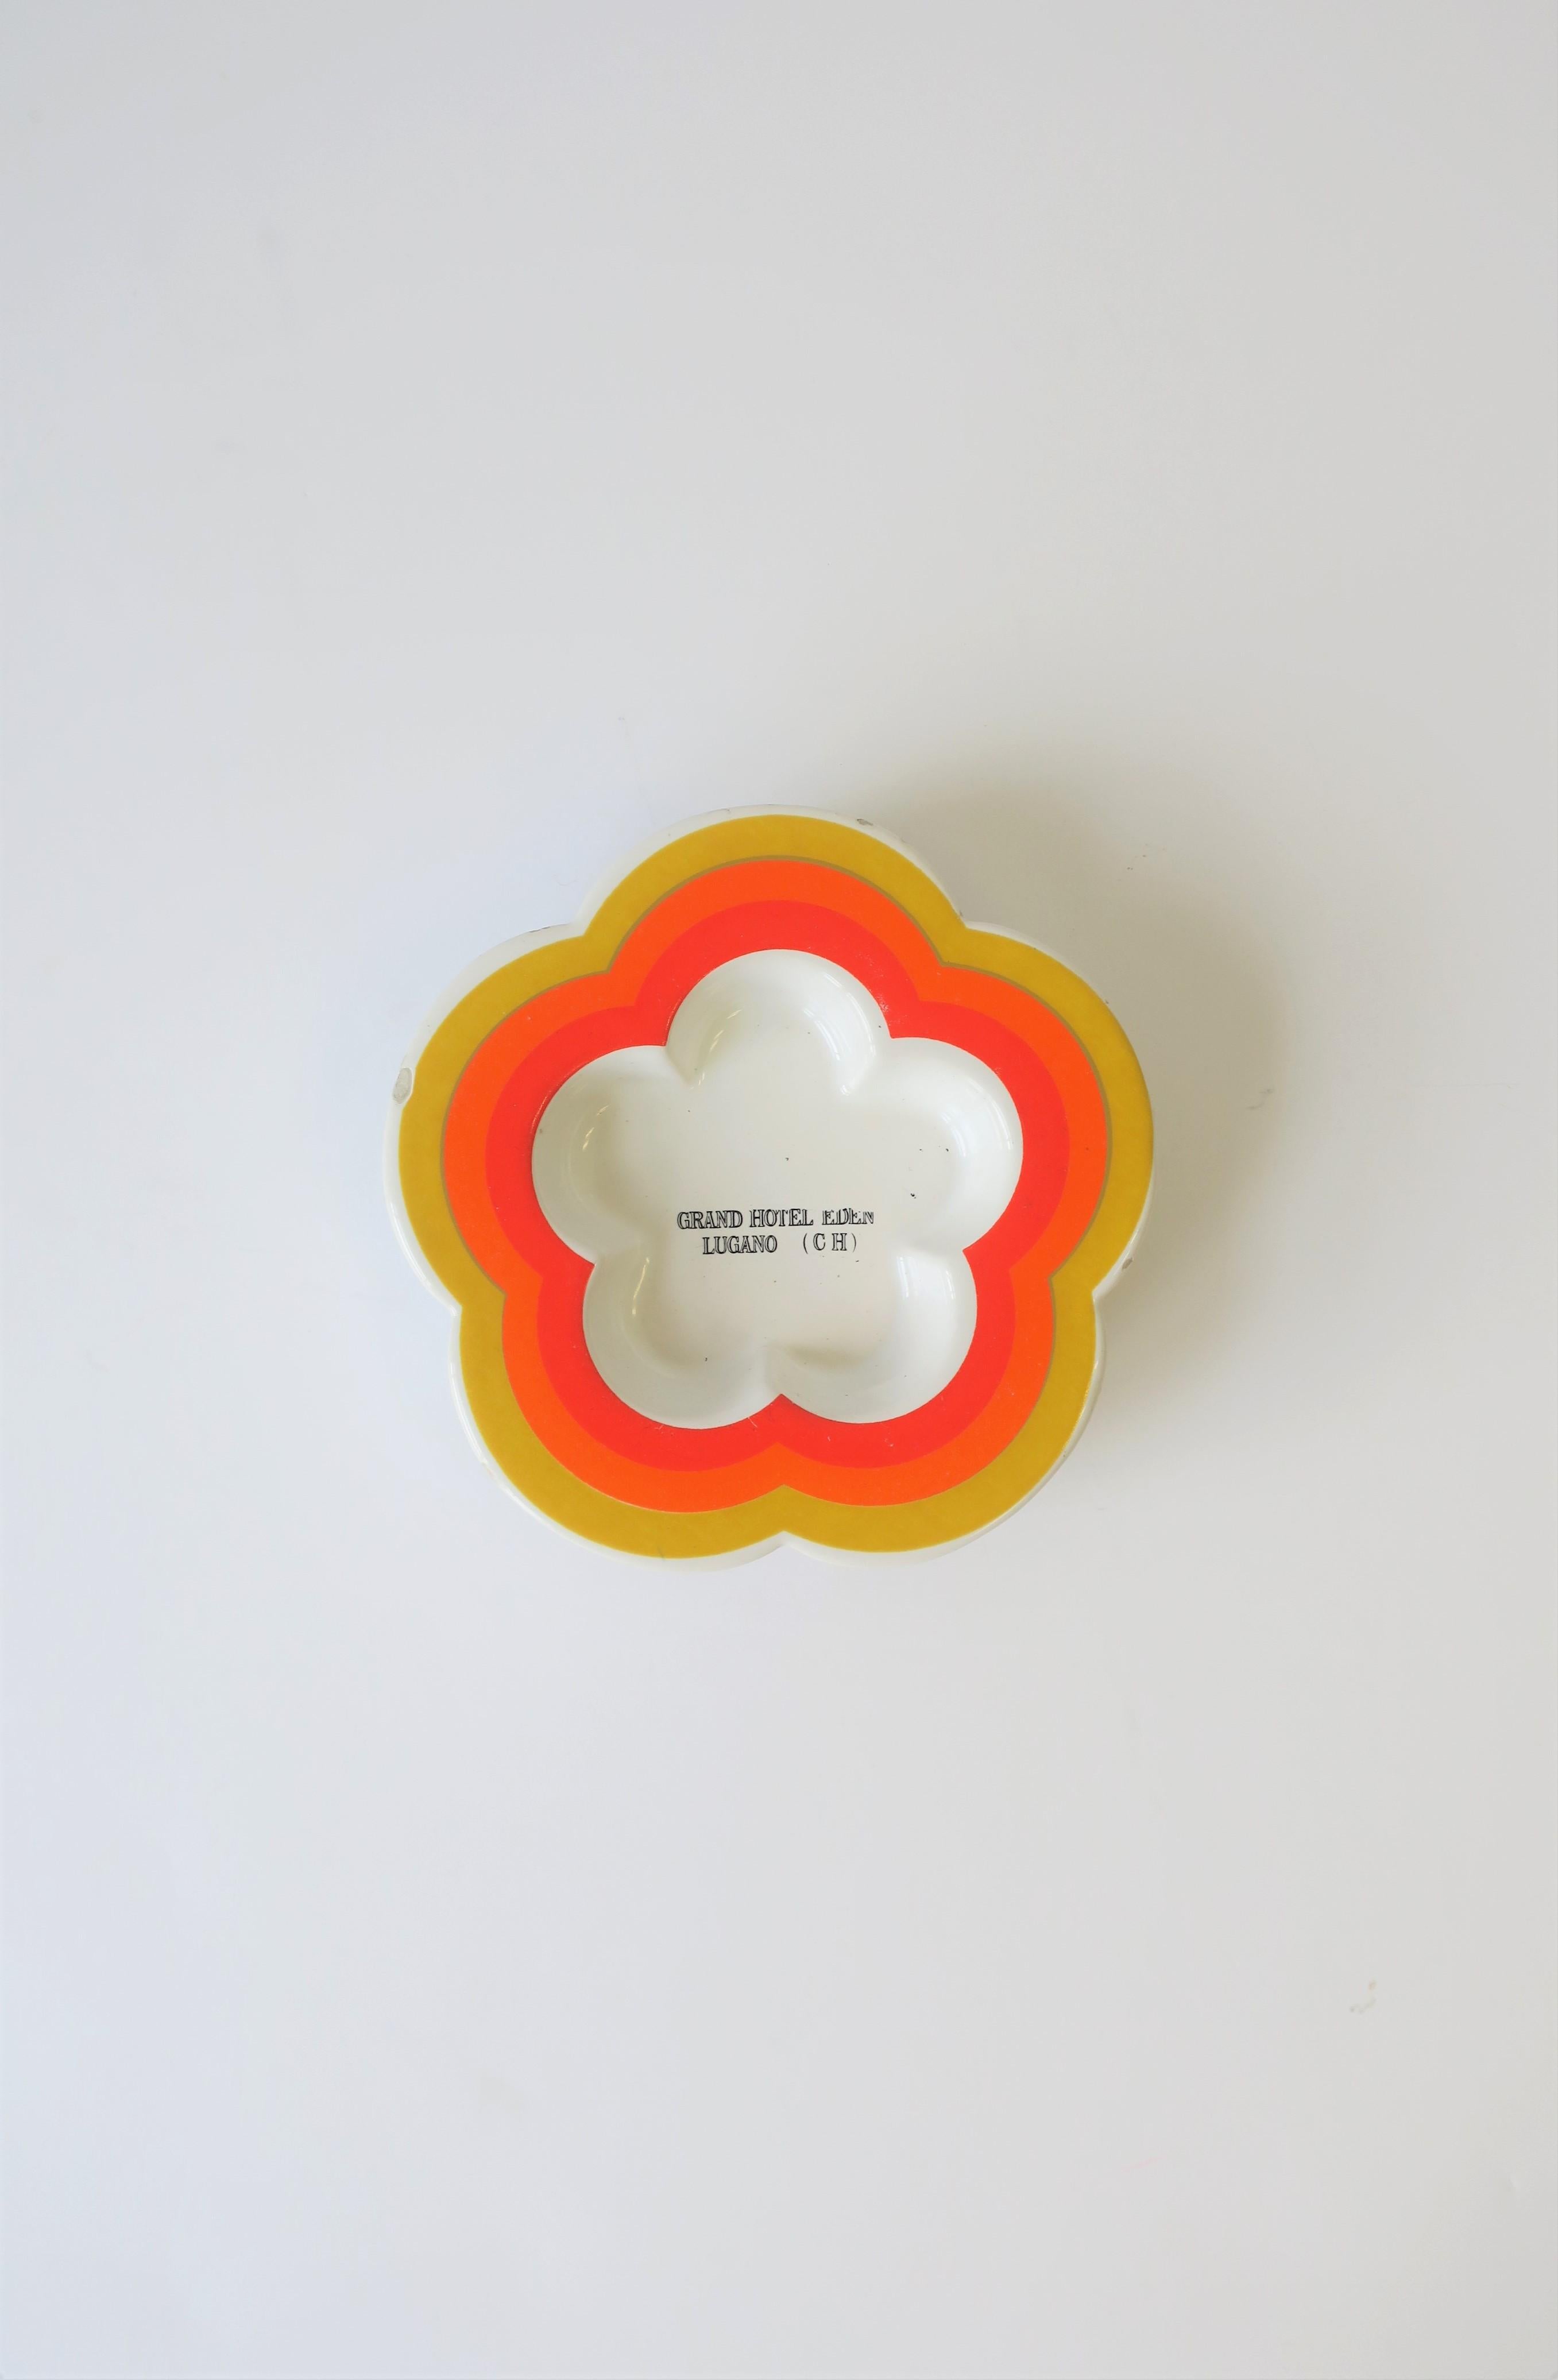 A chic '70s Italian Modern or Postmodern period ceramic dish or vide-poche (catch-all) for small items such a jewelry as demonstrated, circa 1970s, Italy. Dish has a modern 'flower' shape design in white ceramic with rainbow colors of yellow, orange